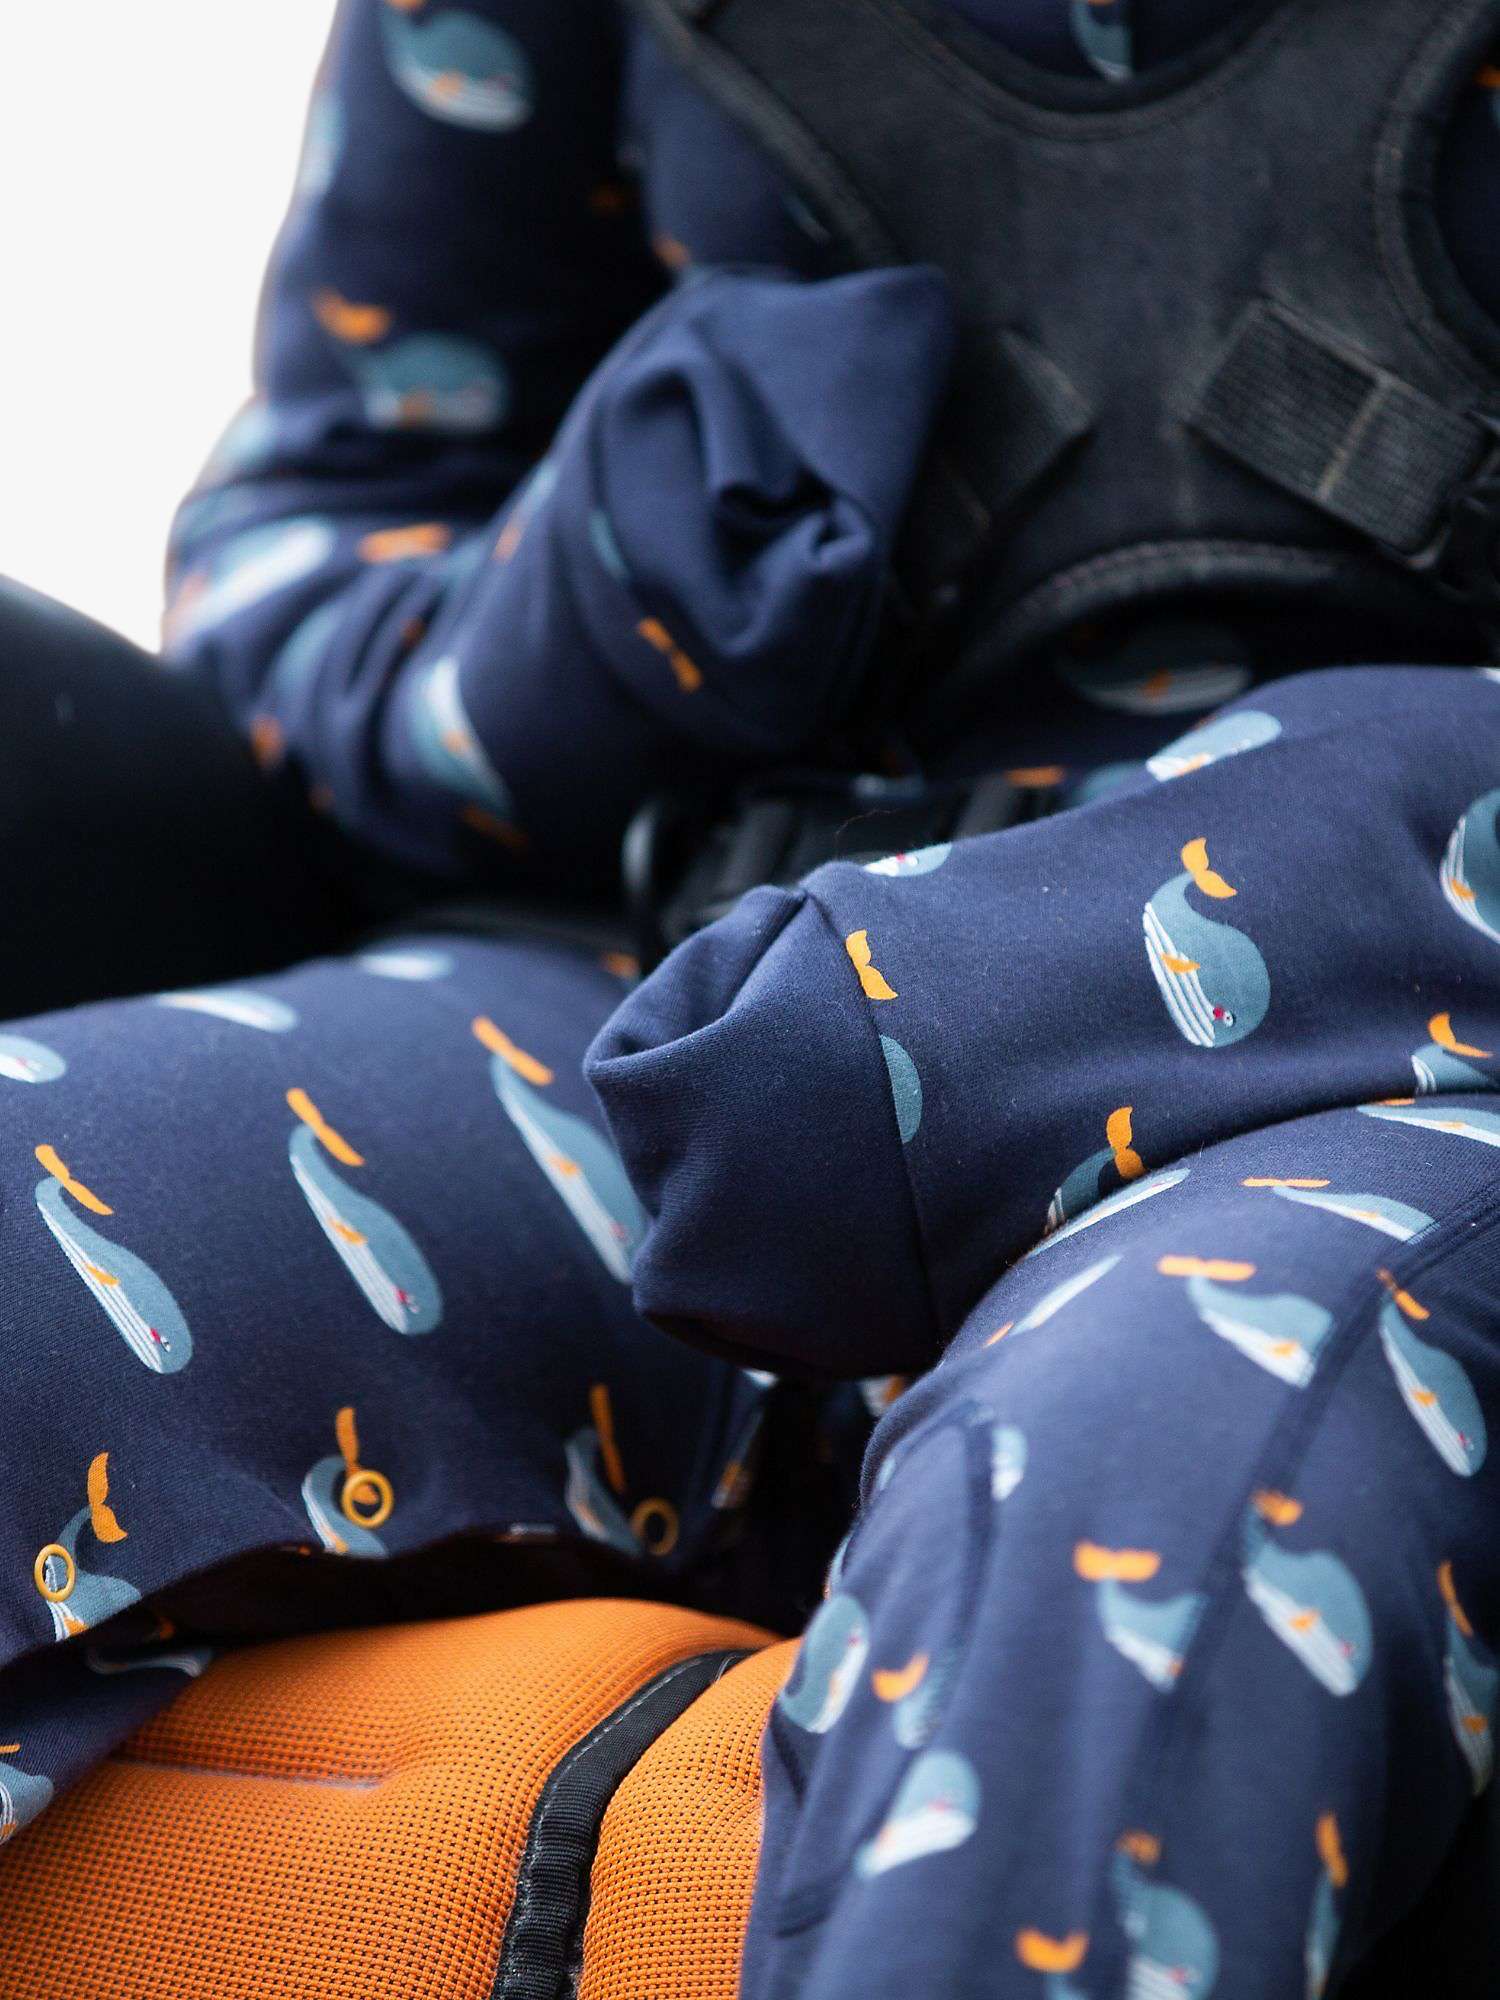 Buy Little Green Radicals Kids' Adaptive Organic Cotton Whale Song Print Sleepsuit, Navy Online at johnlewis.com